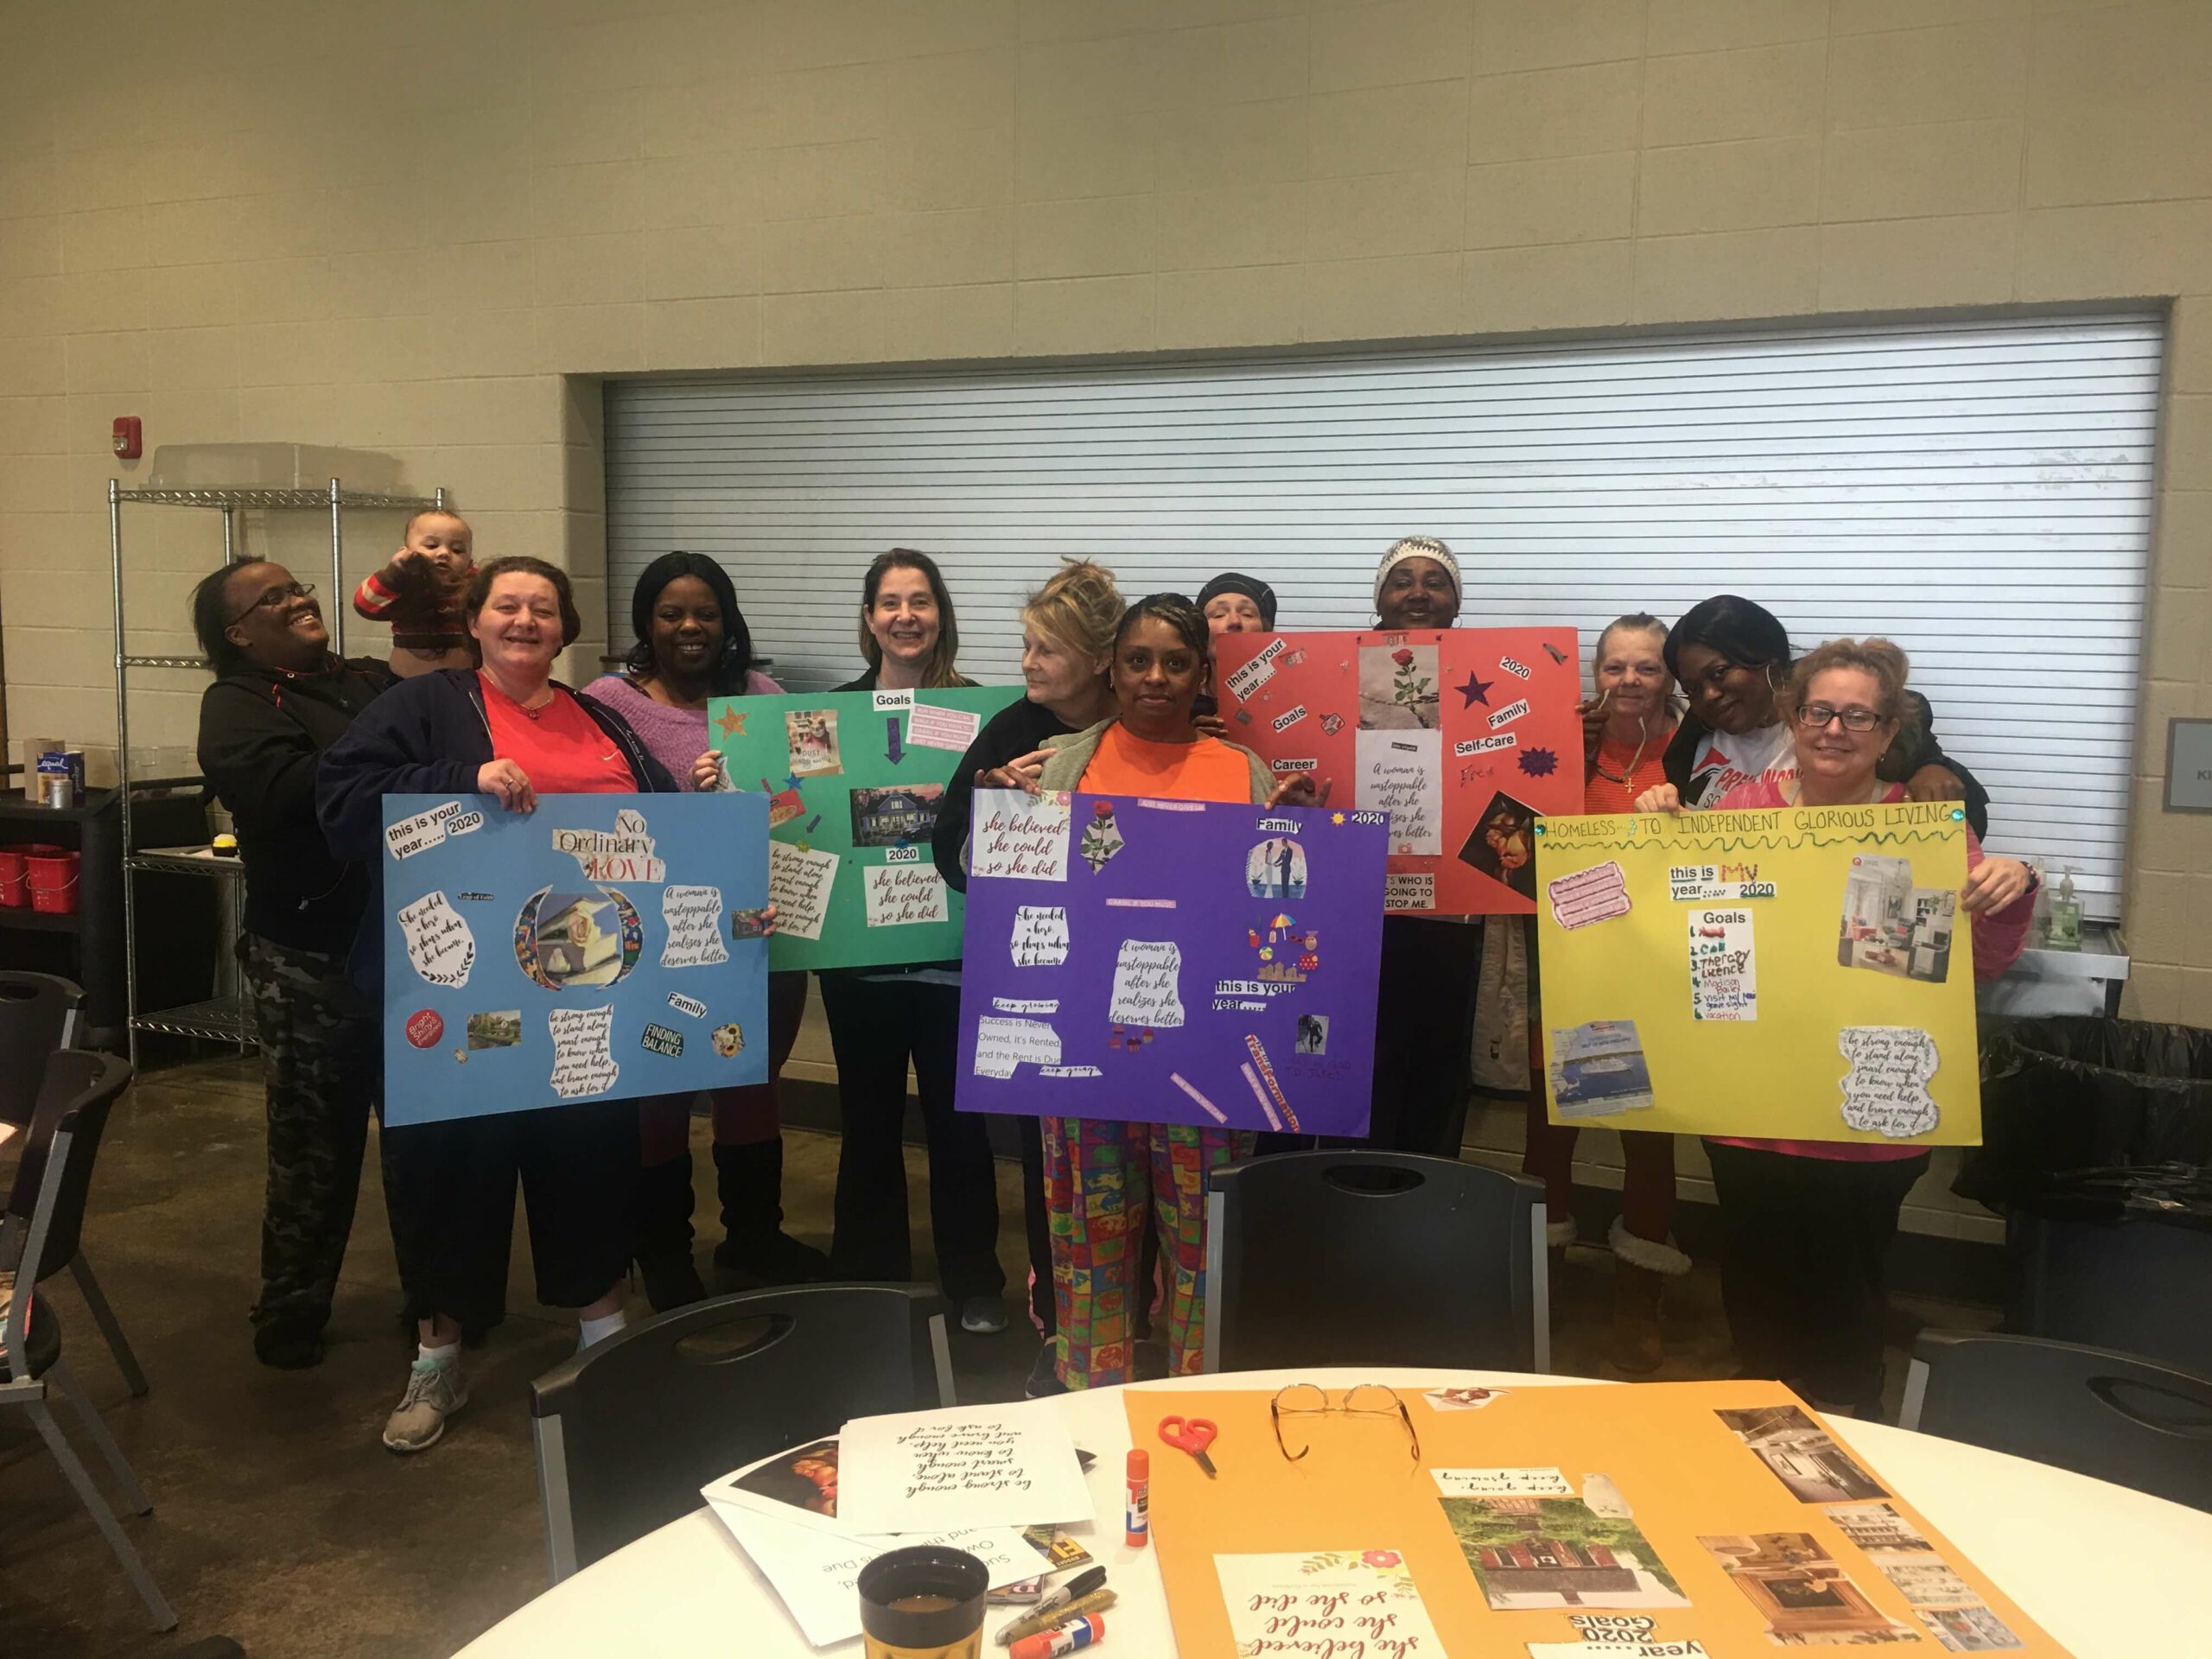 A group photo of volunteers smiling and holding their vision boards.